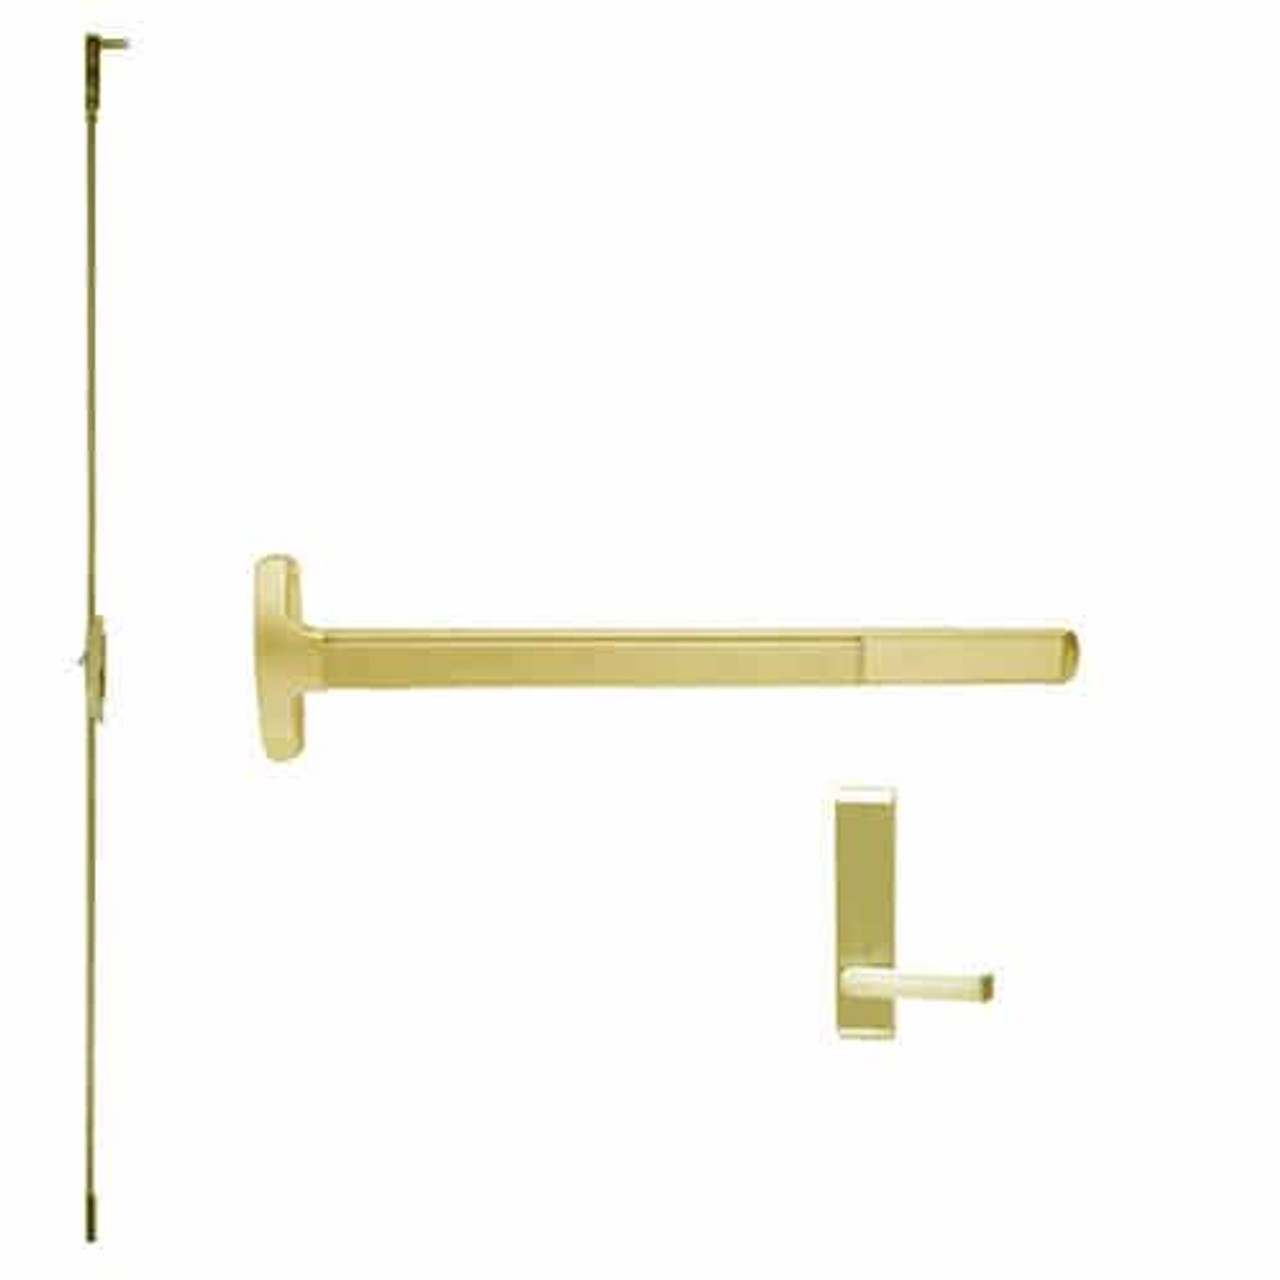 F-24-C-L-BE-DANE-US3-4-LHR Falcon Exit Device in Polished Brass